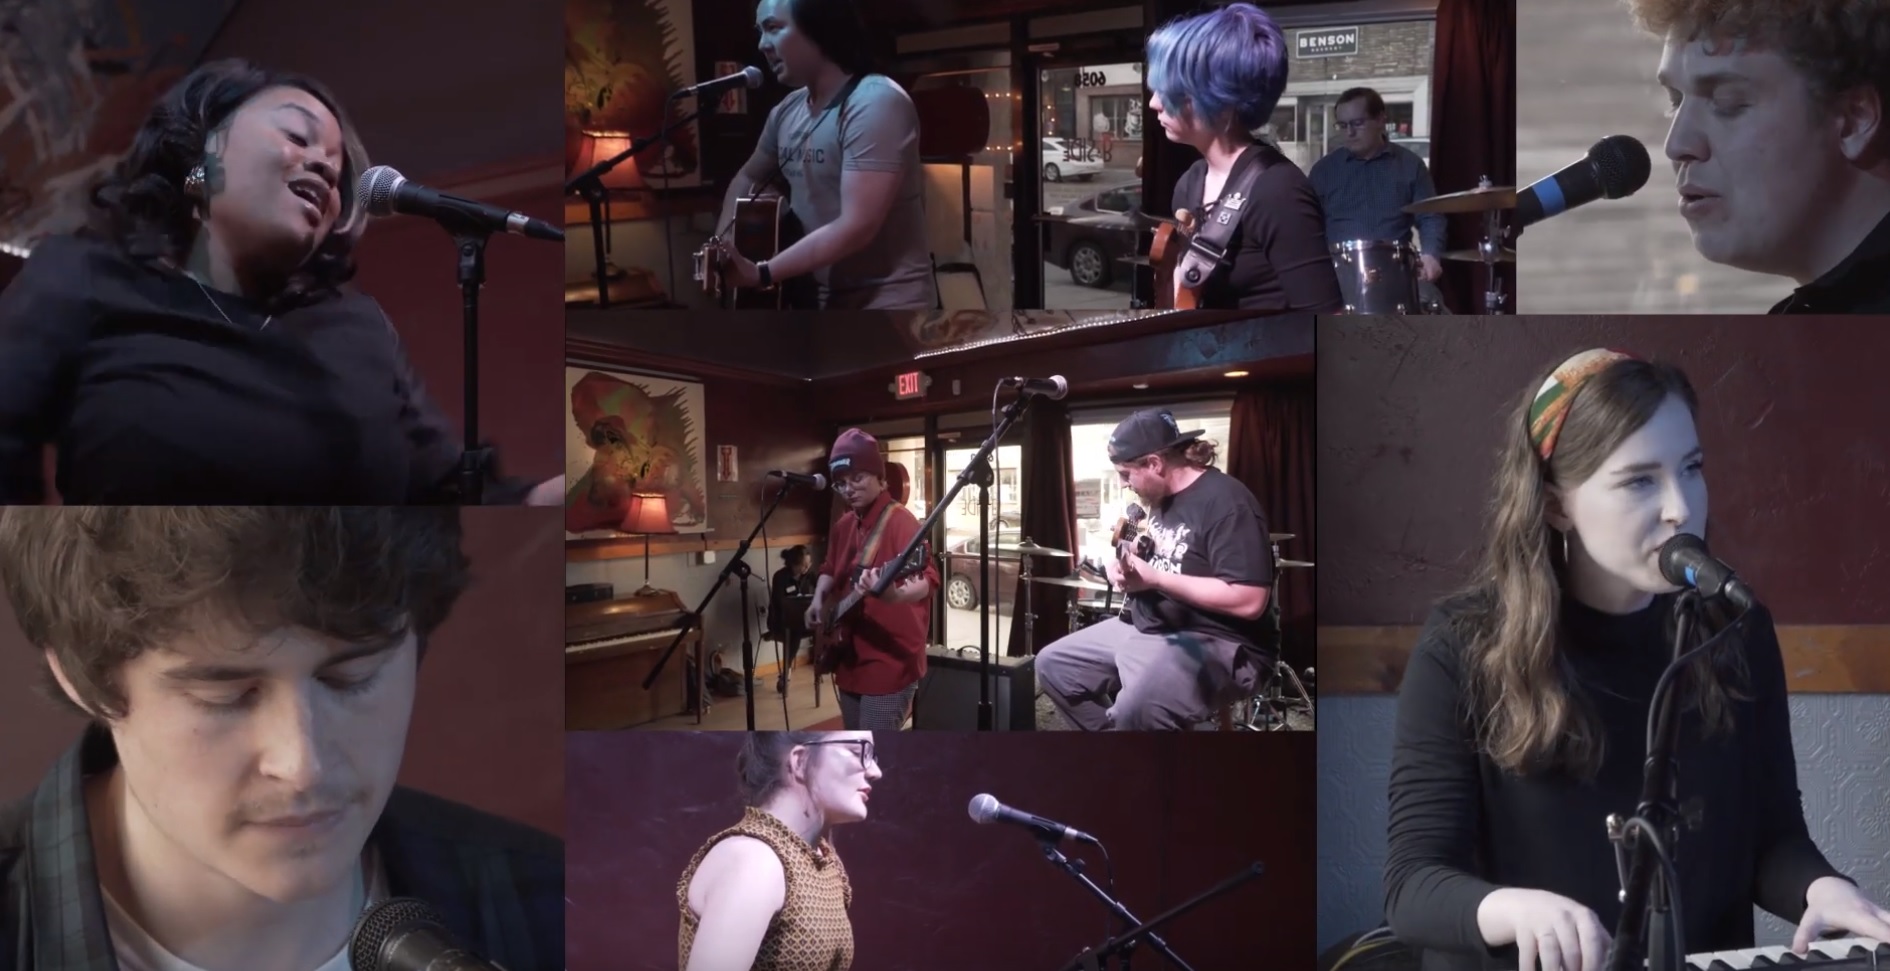 A collage of photos of artists performing at the Singer/Songwriter Competition Showcase